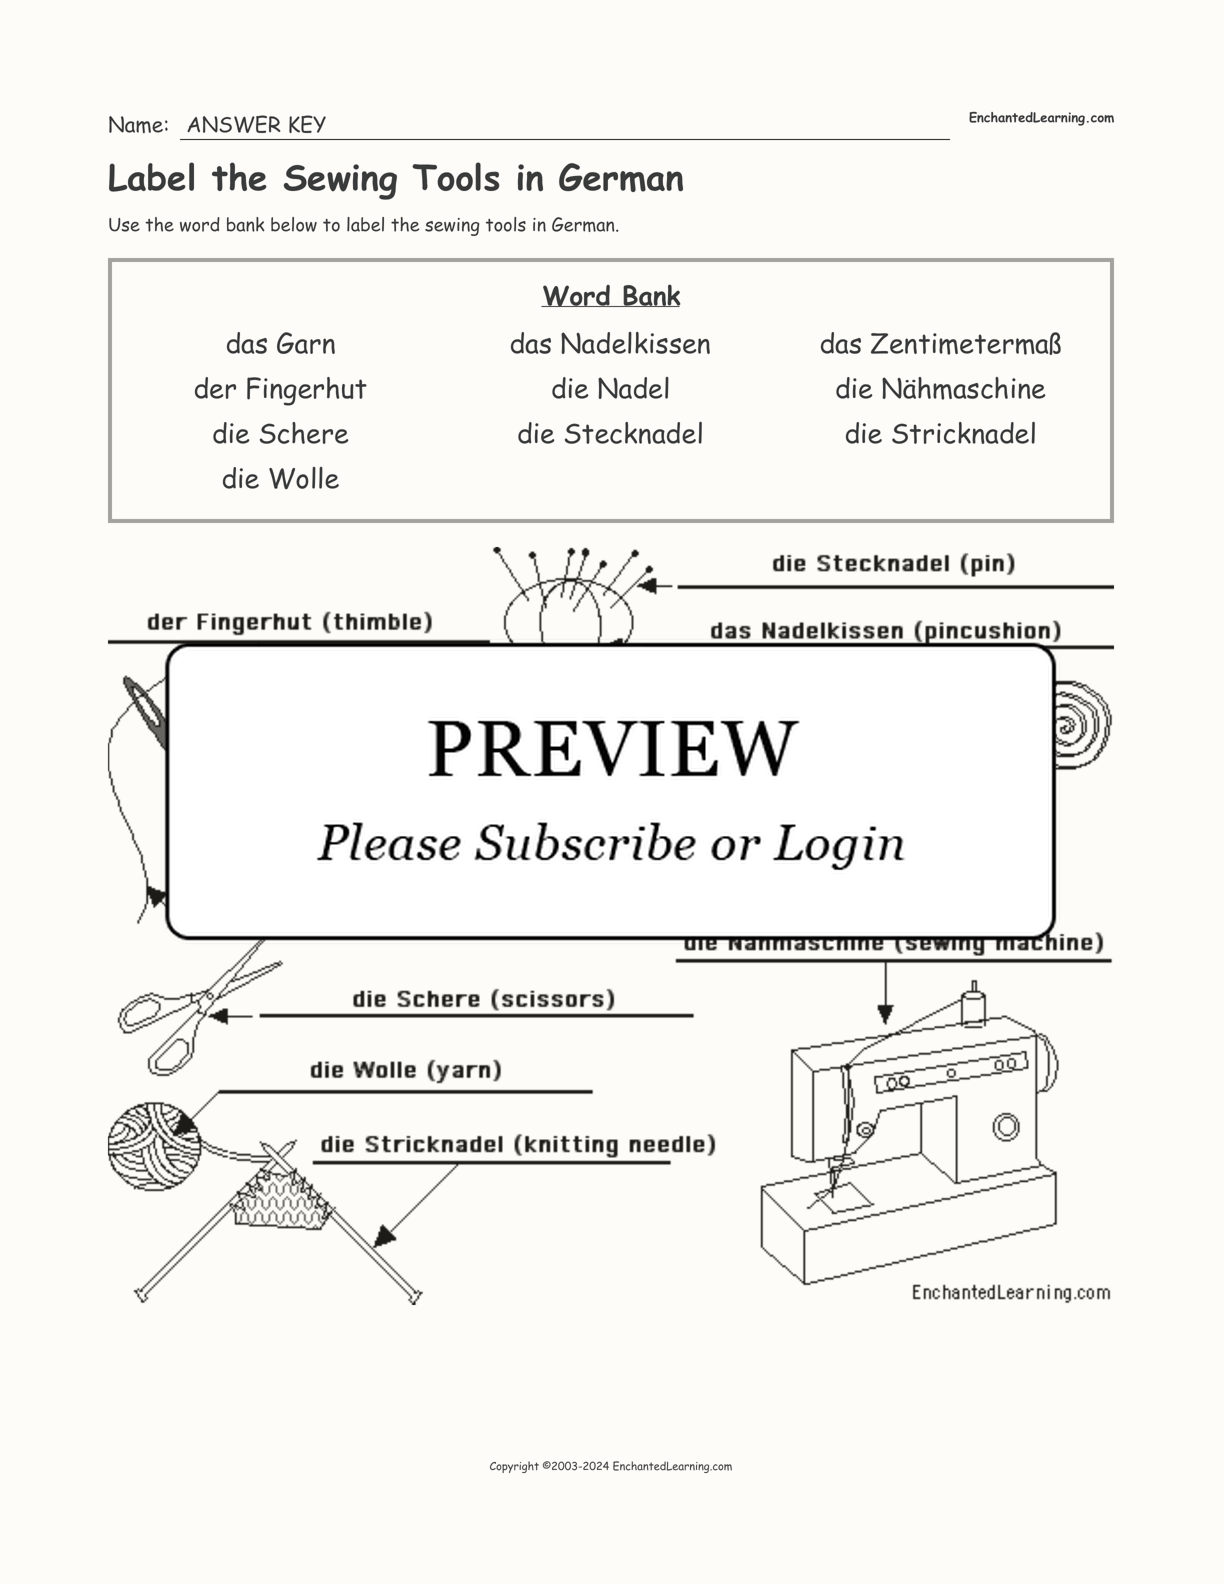 Label the Sewing Tools in German interactive worksheet page 2